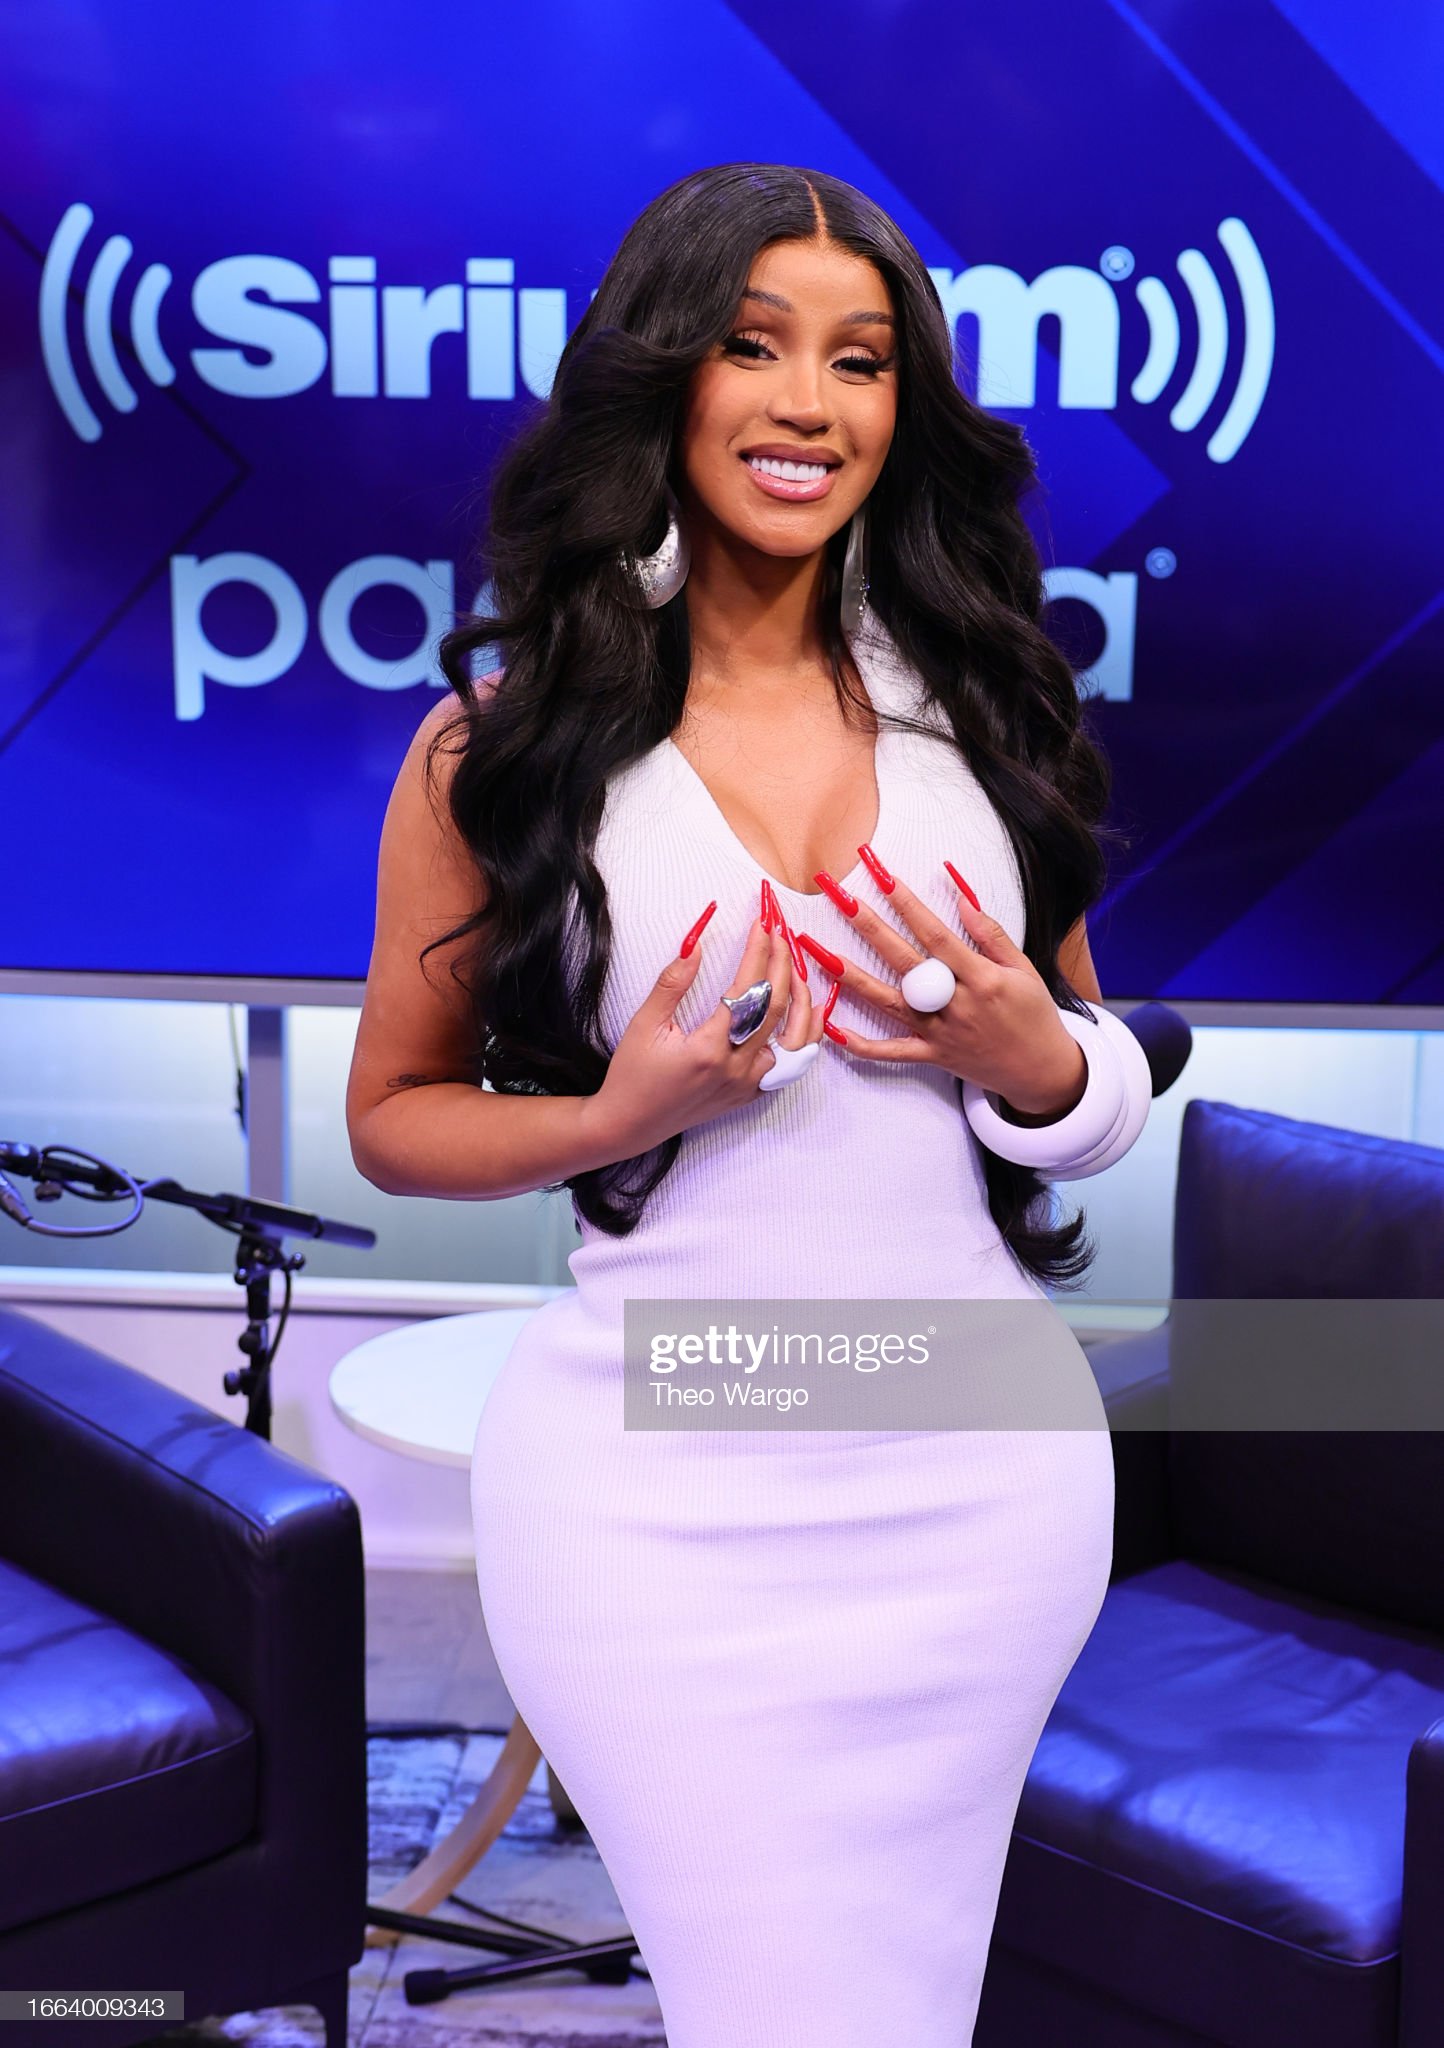 Cardi B Speaks On Collaborating With Offset + More On SiriusXM's Hip Hop Nation